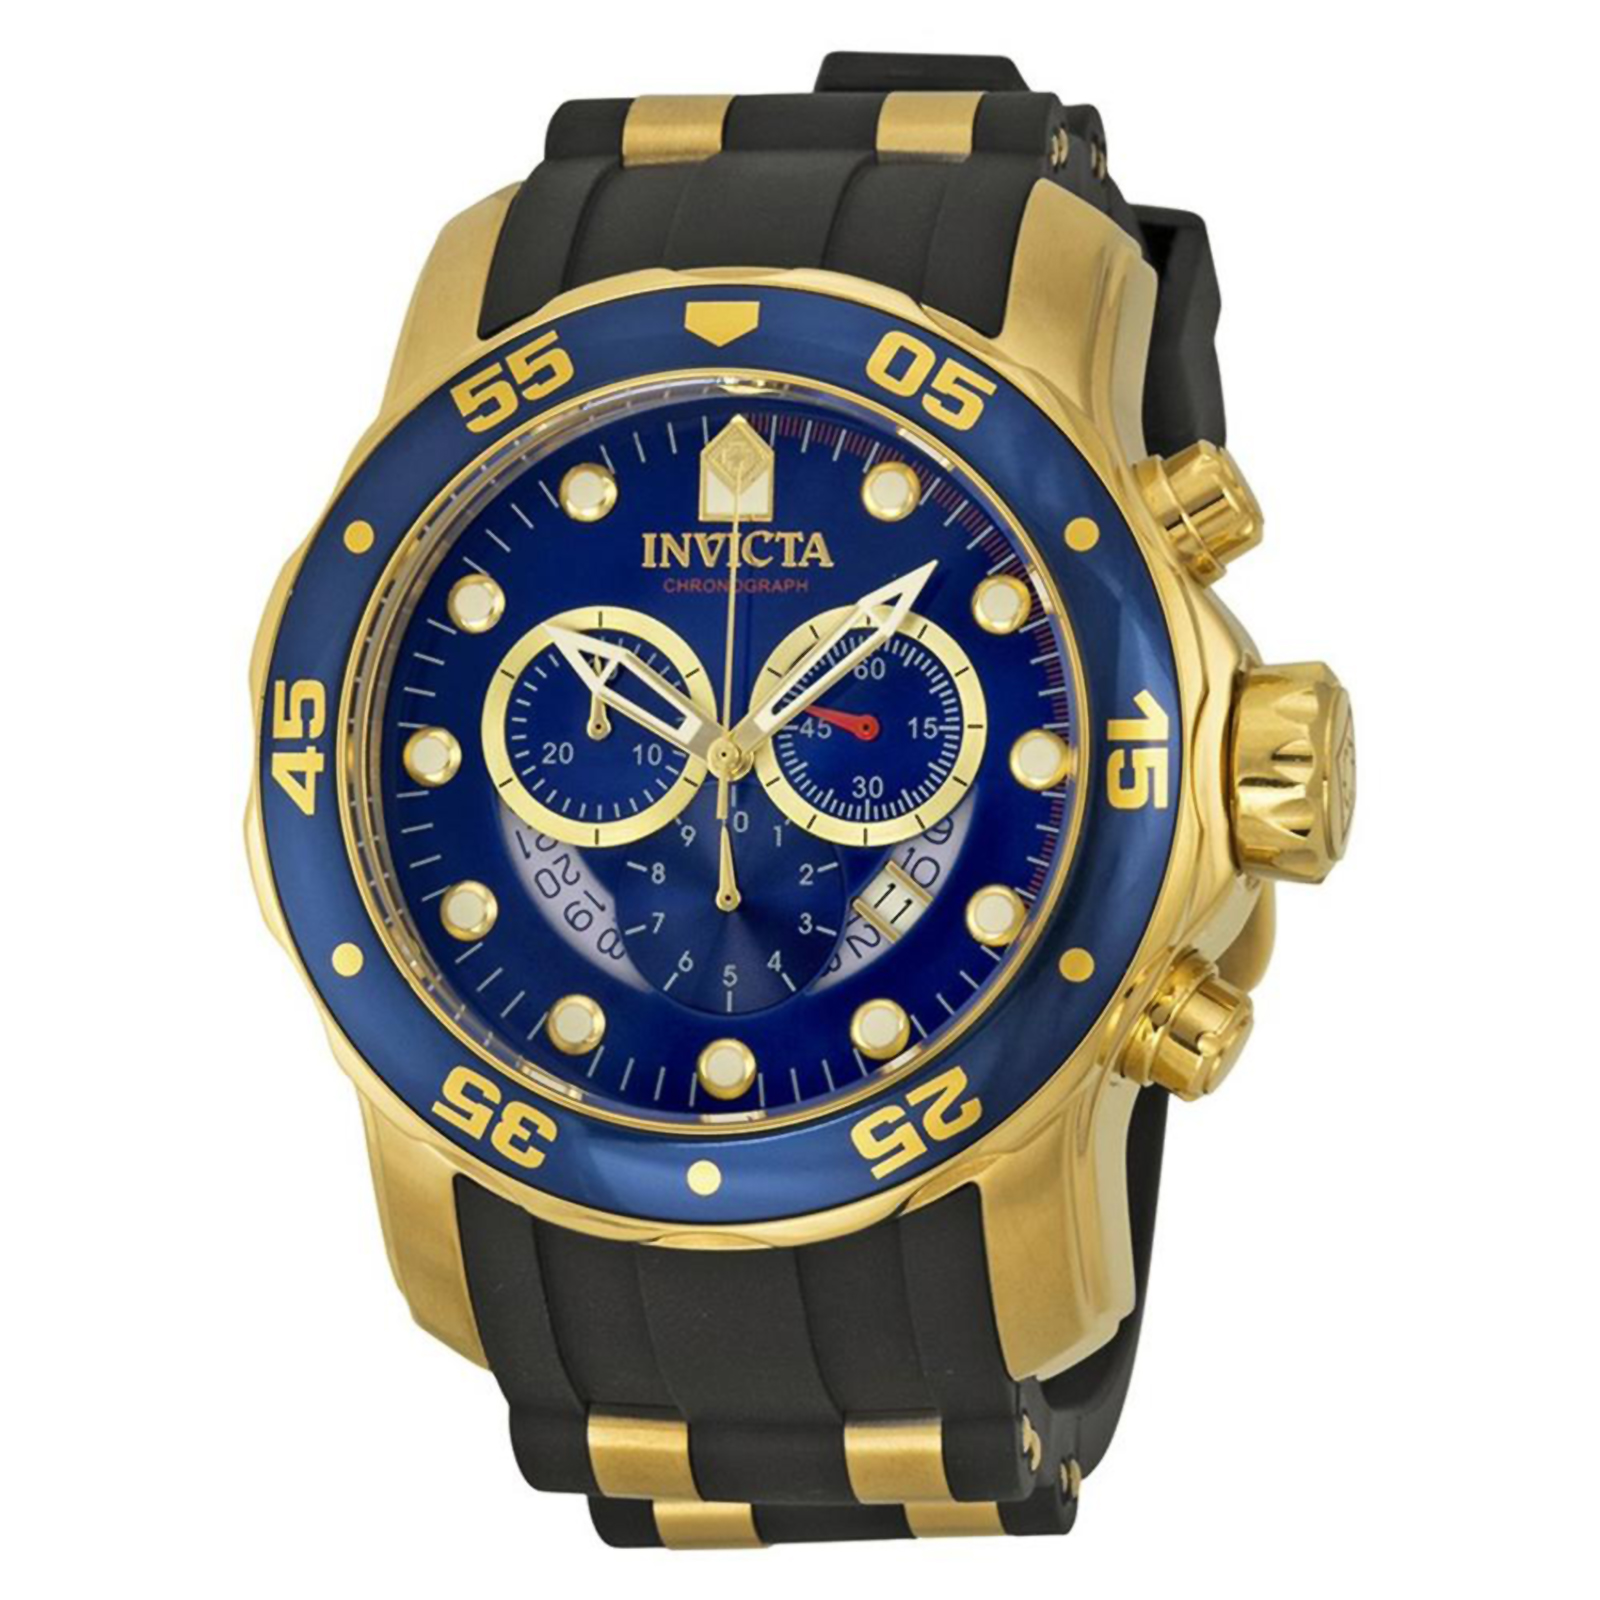 Invicta 6983 Men's Pro Diver Stainless Steel Chronograph Watch - Black